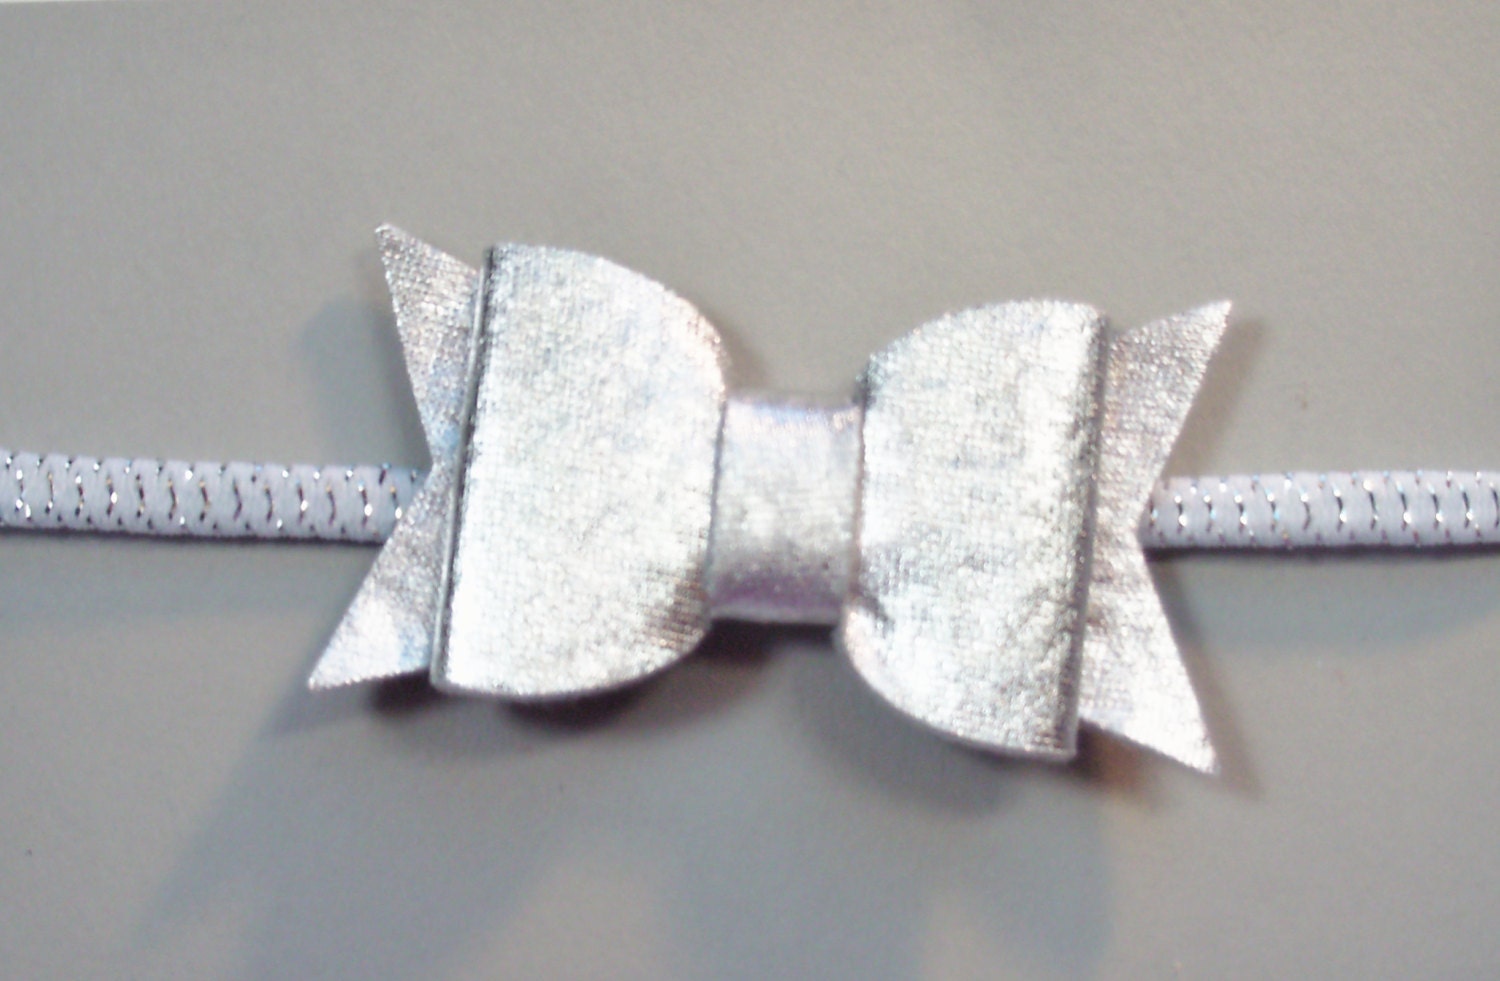 446 New baby headbands claire's 445 Silver metallic Claire bow headband. Baby hair bow by WhimsyFelt 